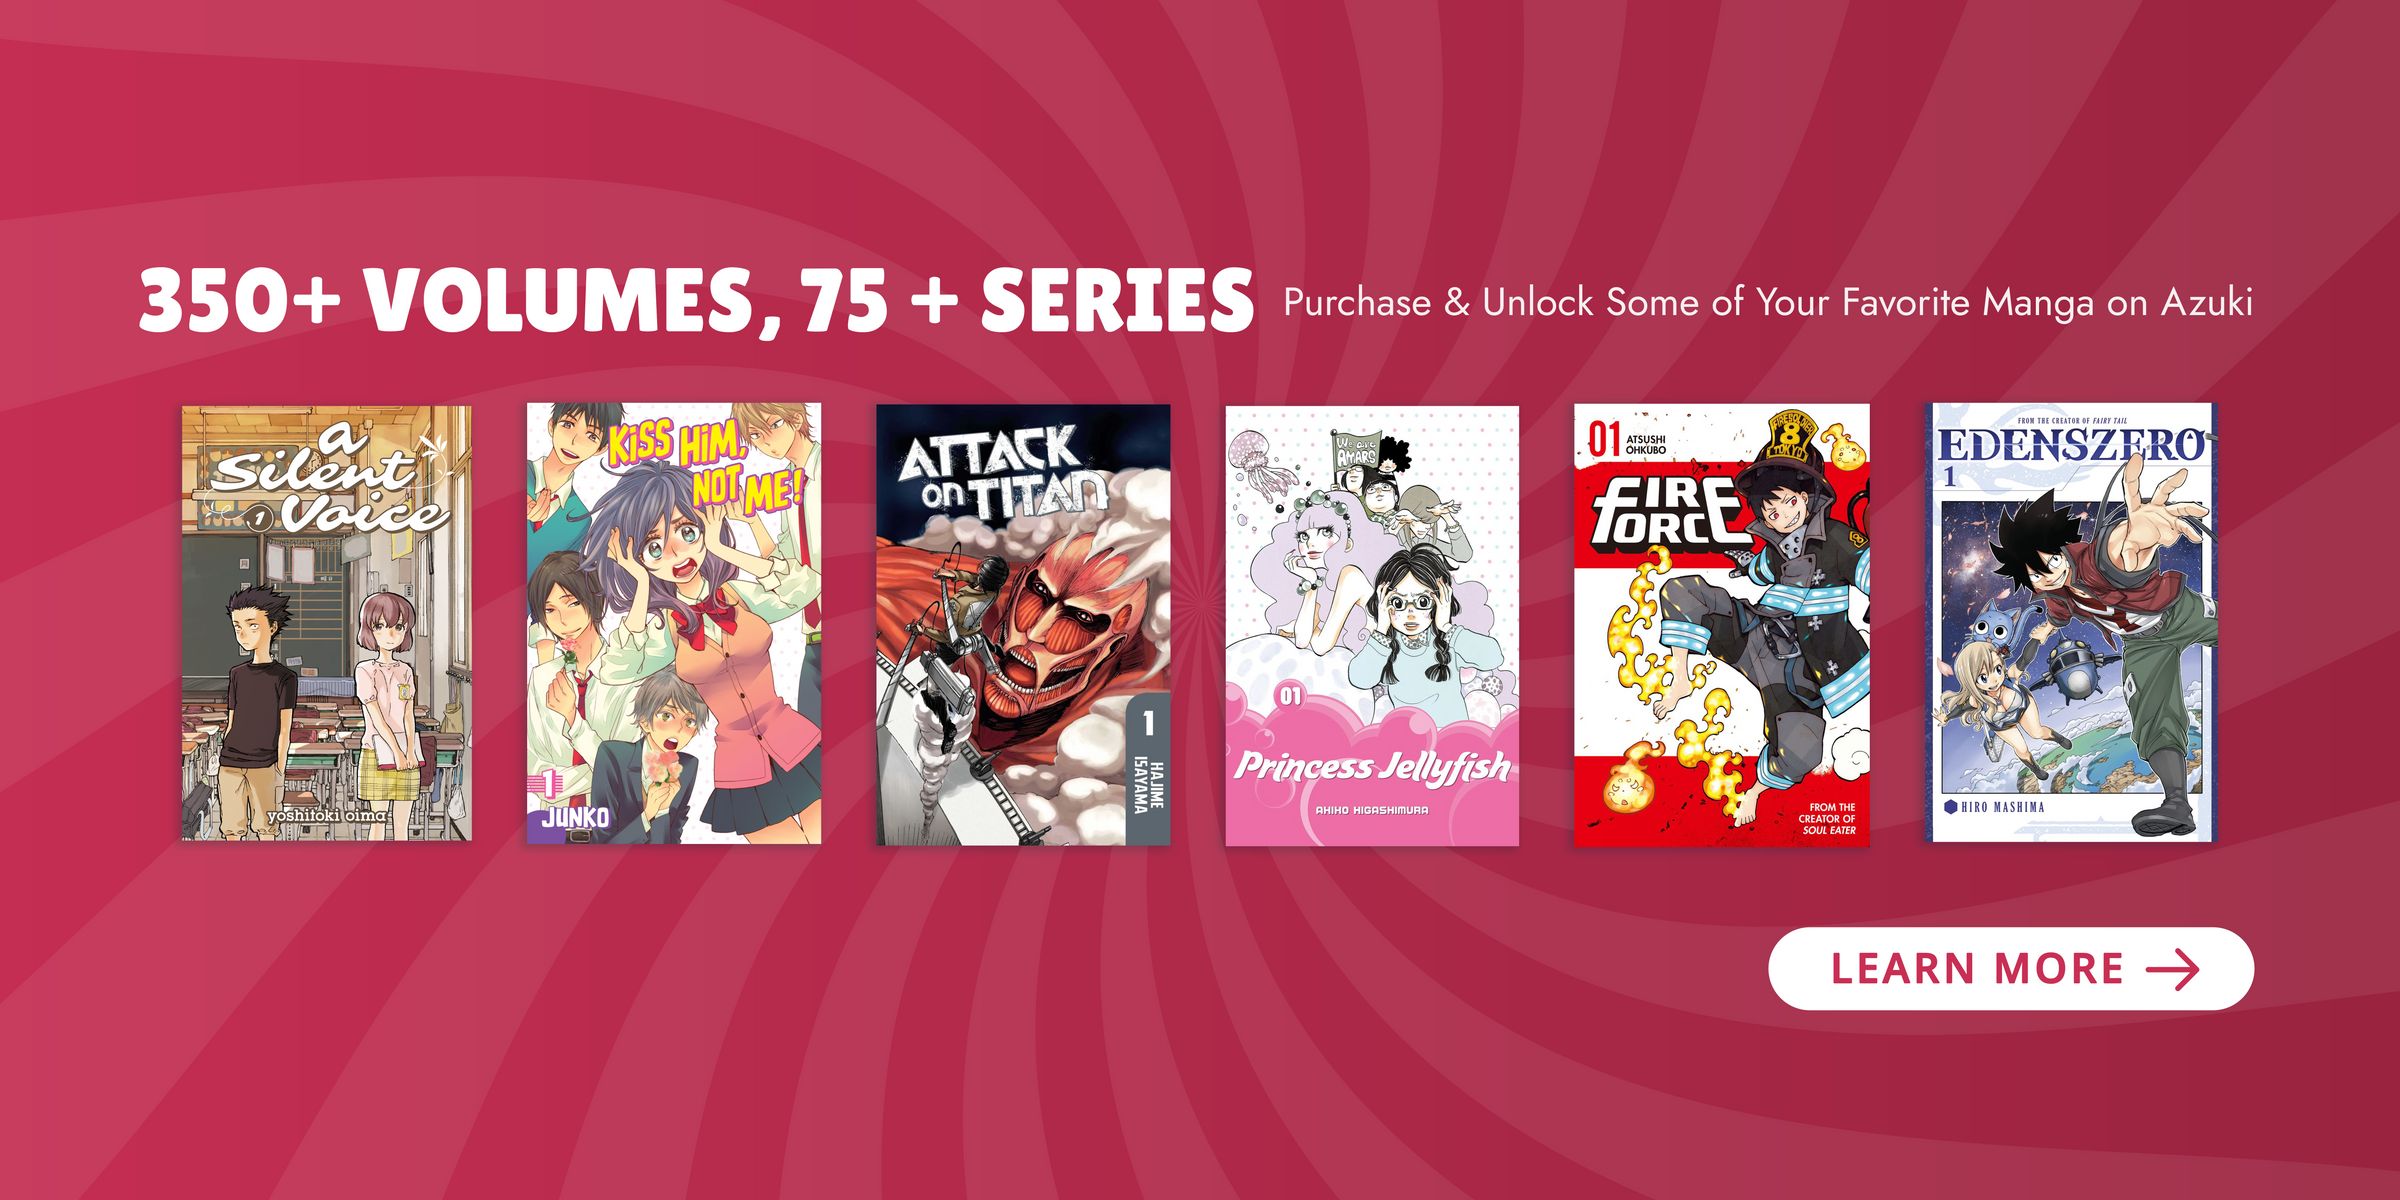 Over 350 volumes and 75 series. Purchase & Unlock Some of Your Favorite Manga on Azuki. Learn More.